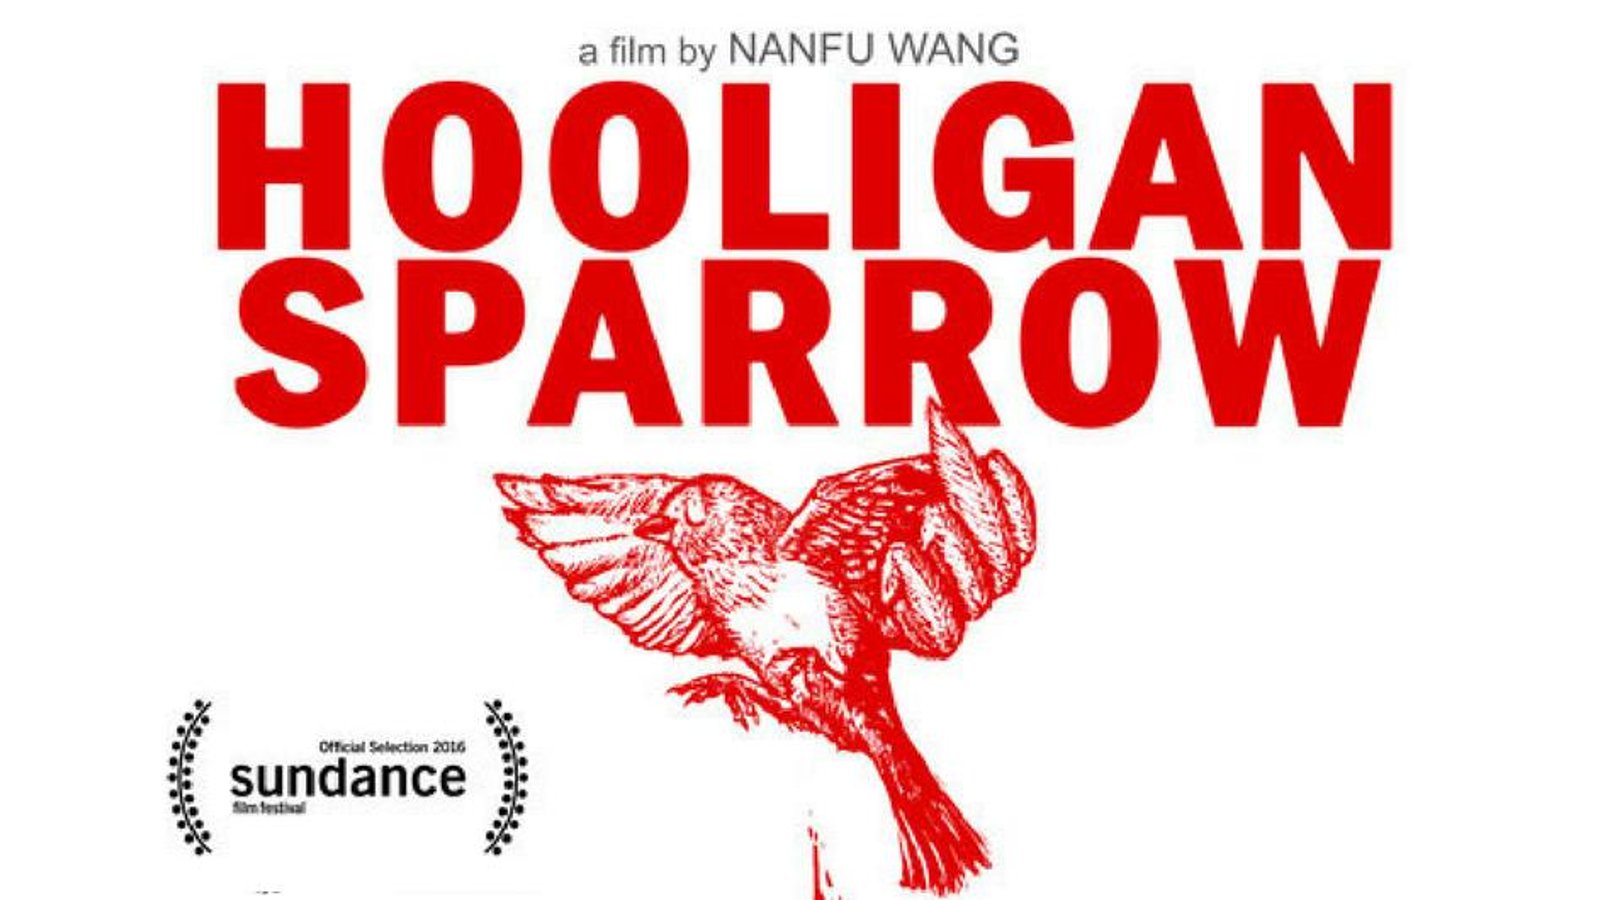 Hooligan Sparrow - A Champion for Girls' and Women's Rights in China